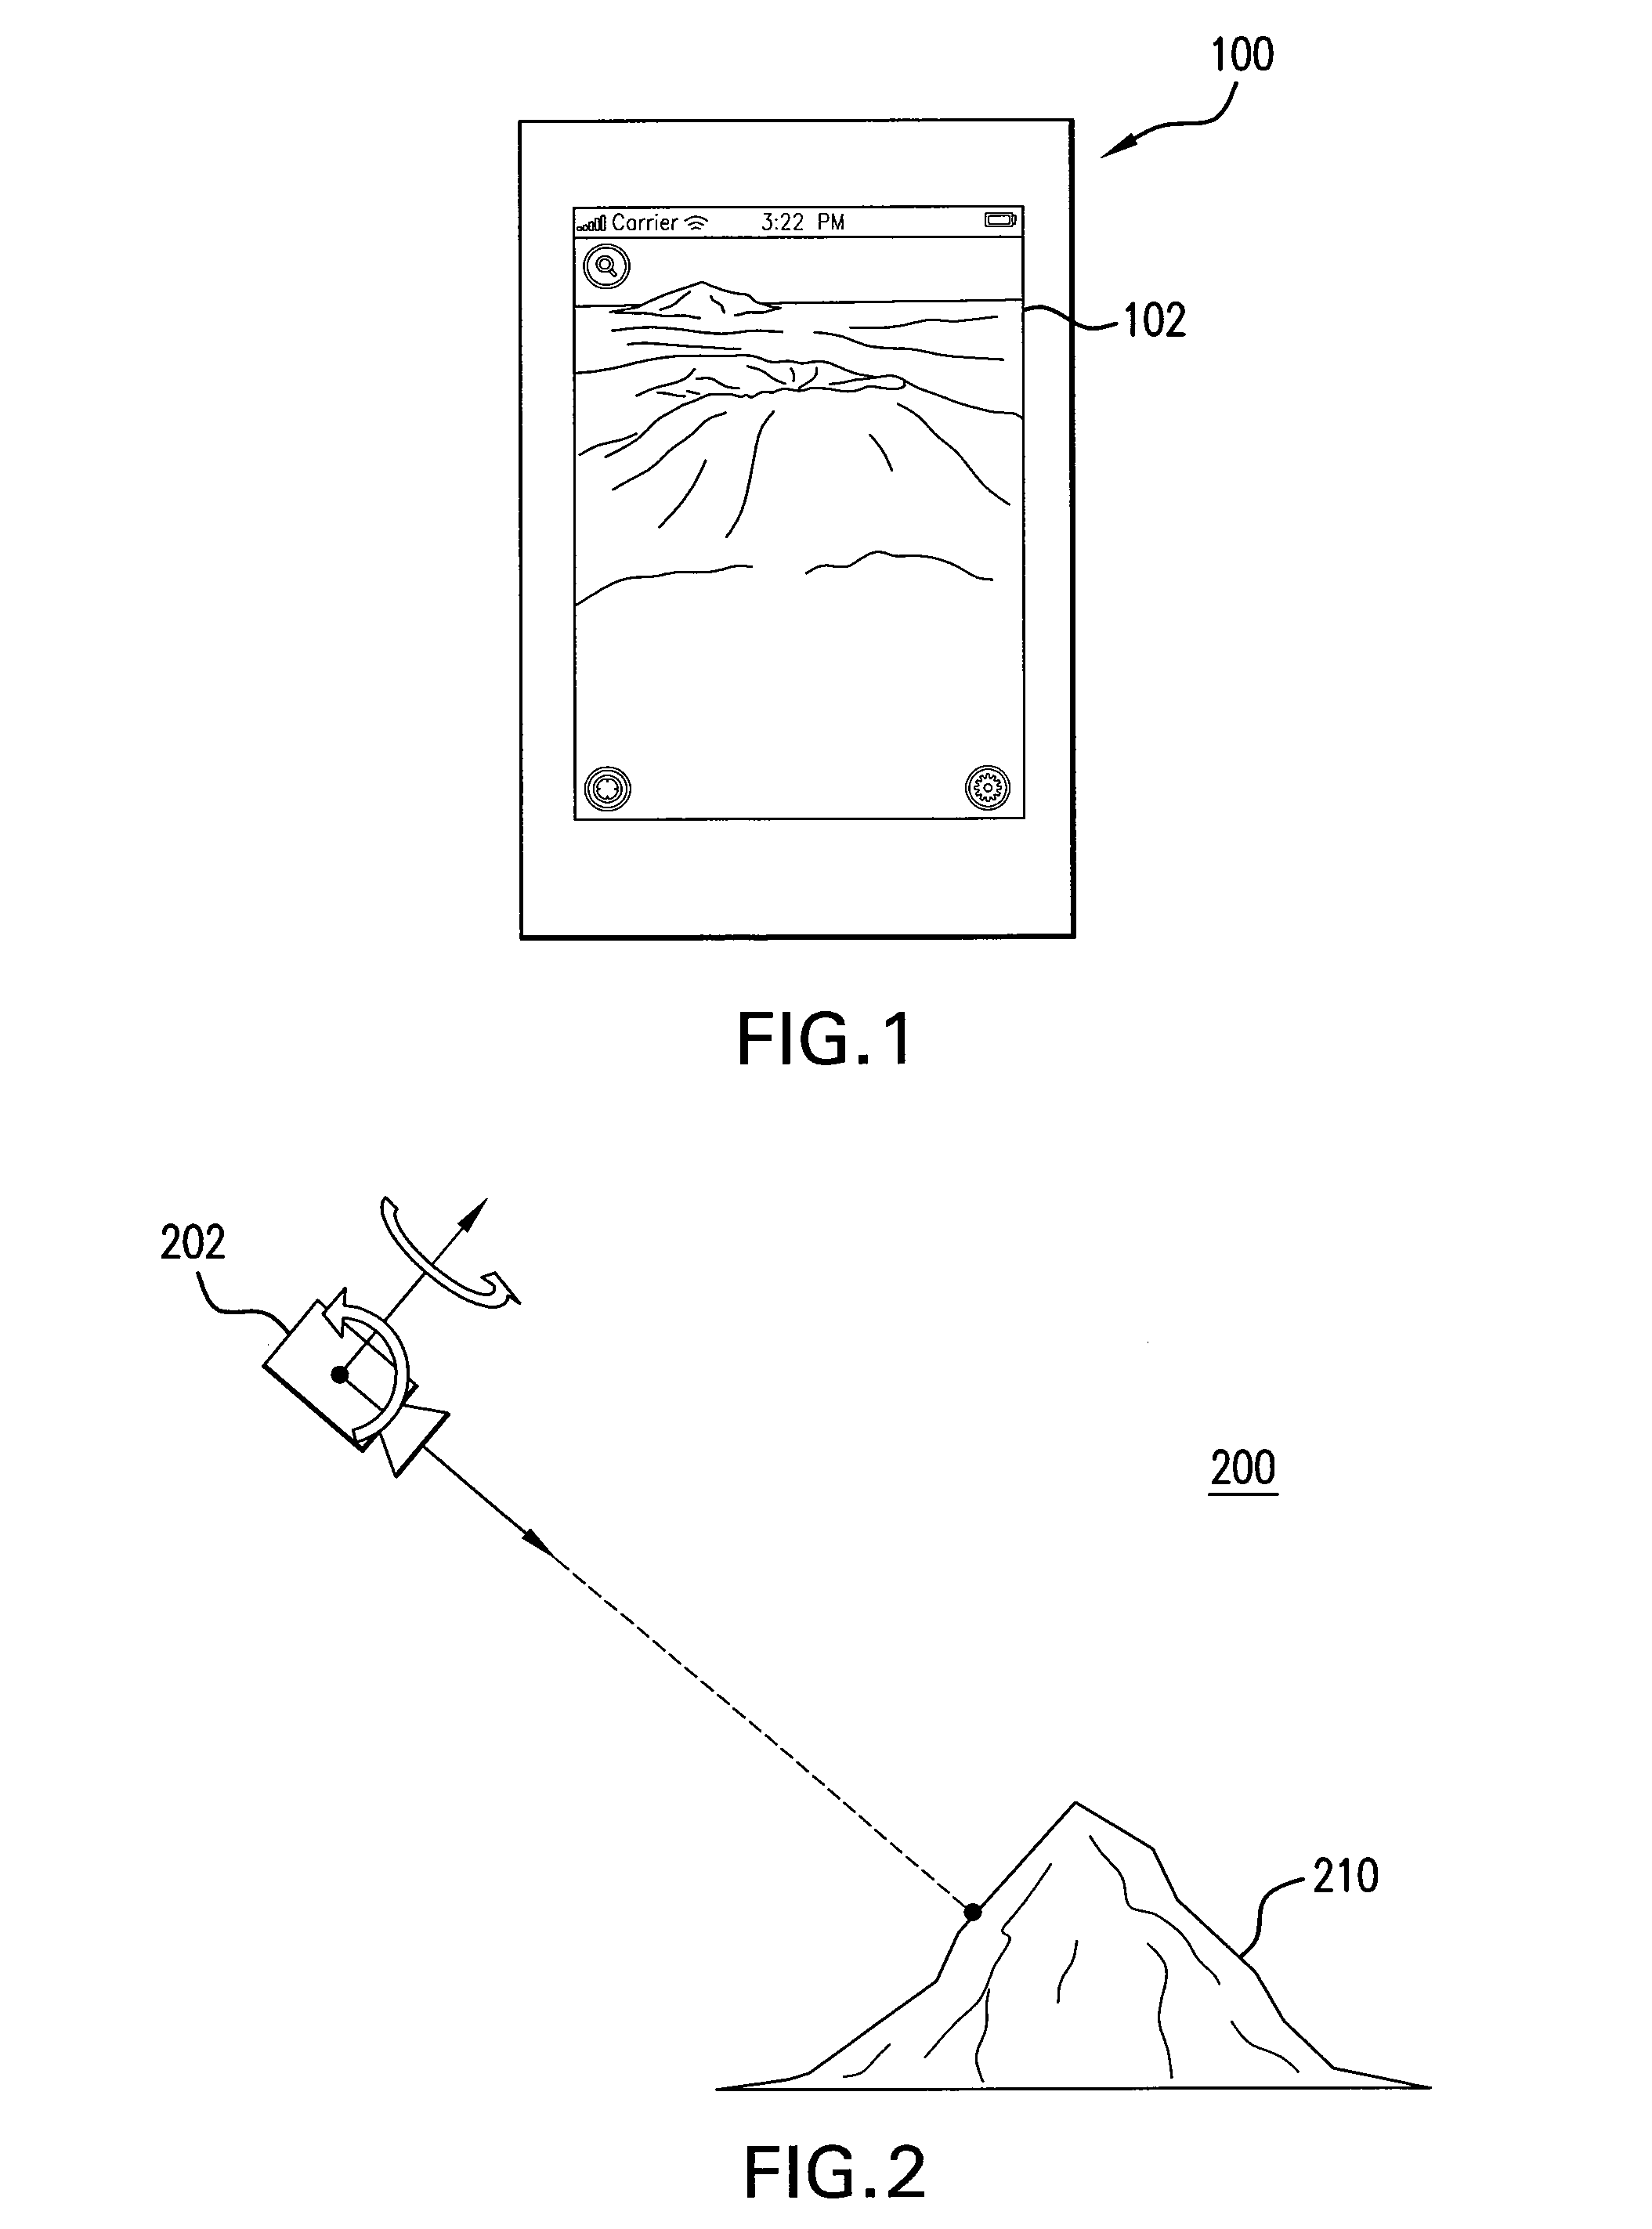 User Interface Gestures For Moving a Virtual Camera On A Mobile Device